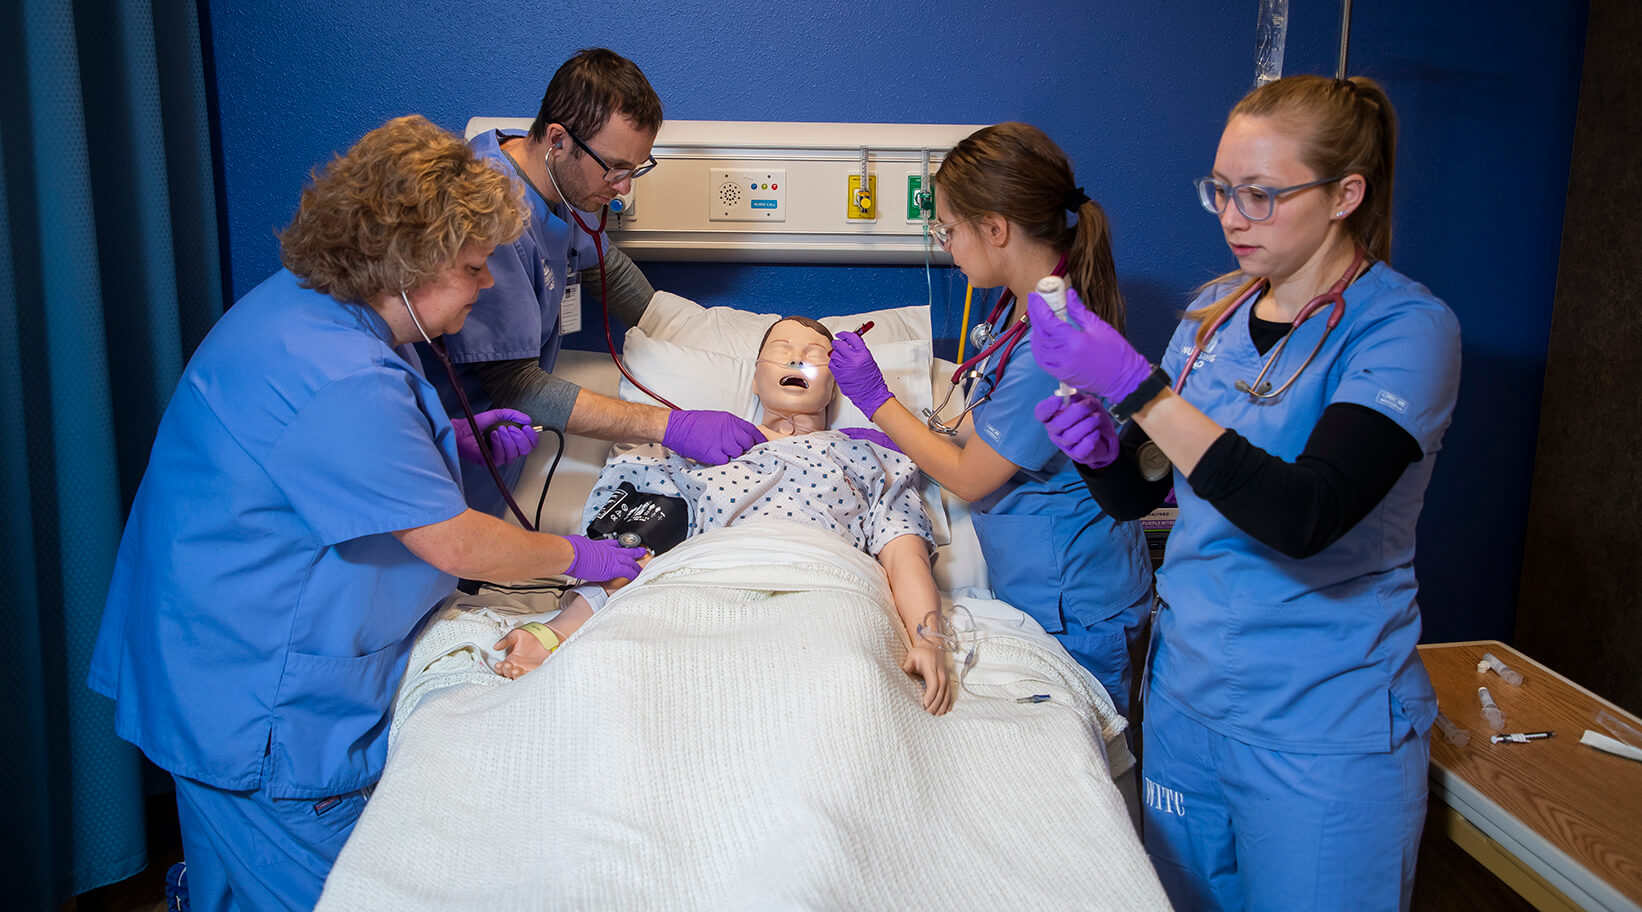 A group of students working together and checking vitals on a simulated patient